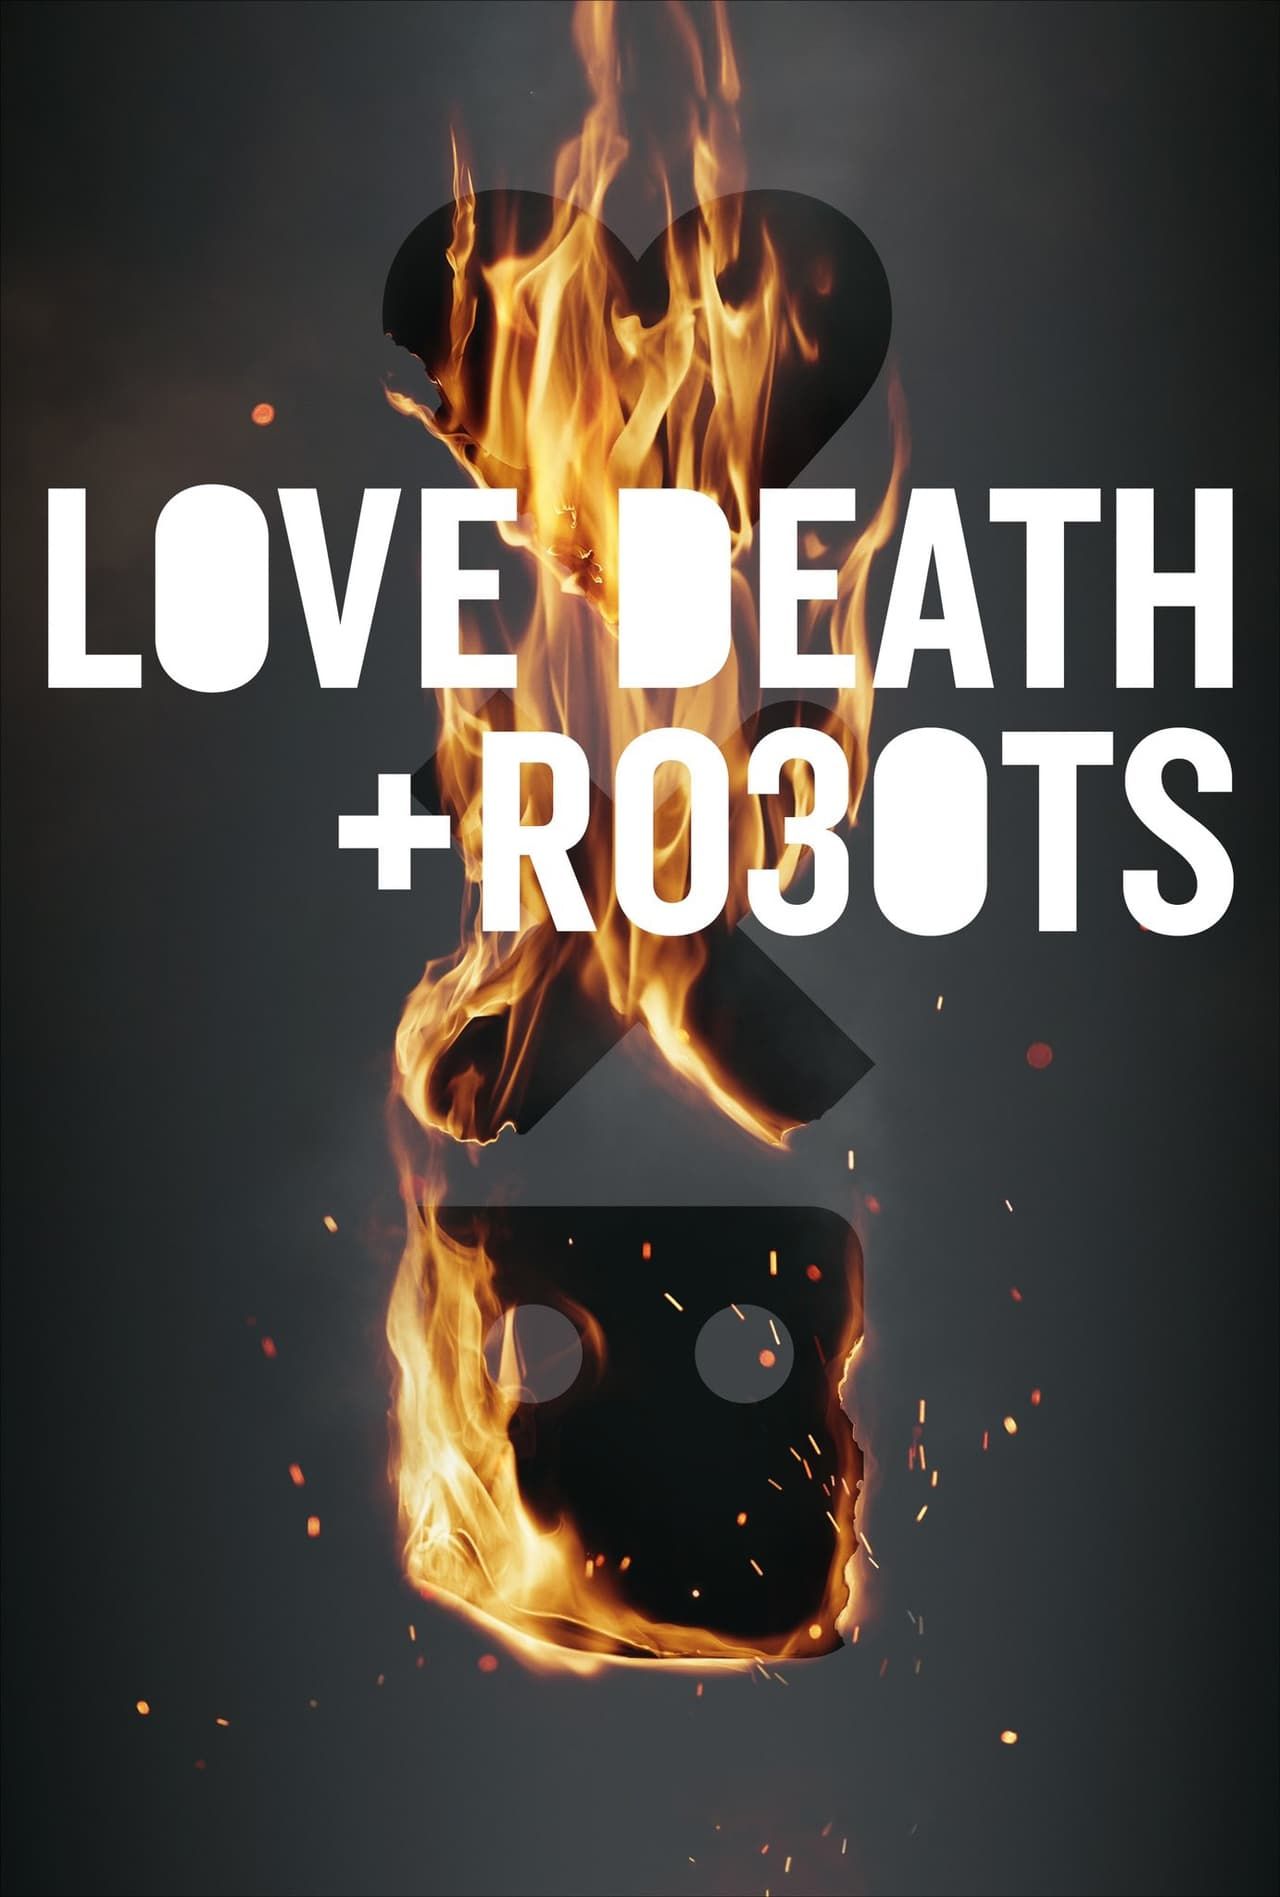 Love Death and Robots Season 3 Poster Showing a Heart, X, and Robot Emoji on Fire